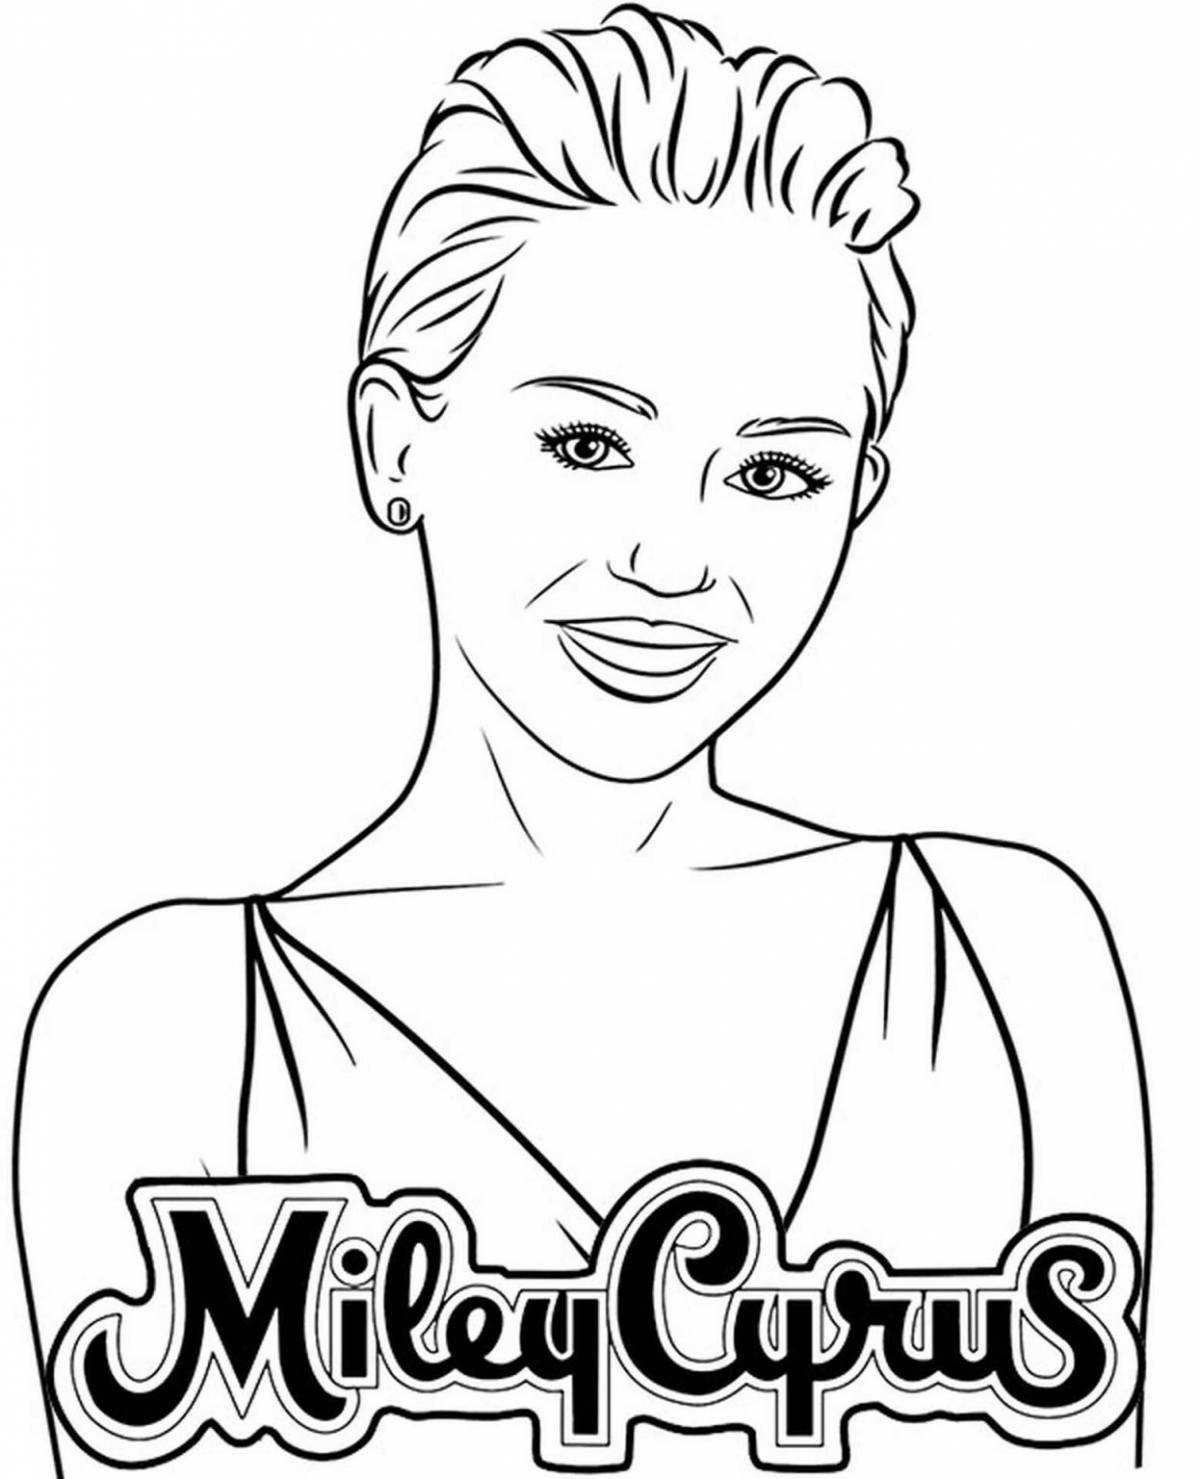 Miley Cyrus' charming coloring book